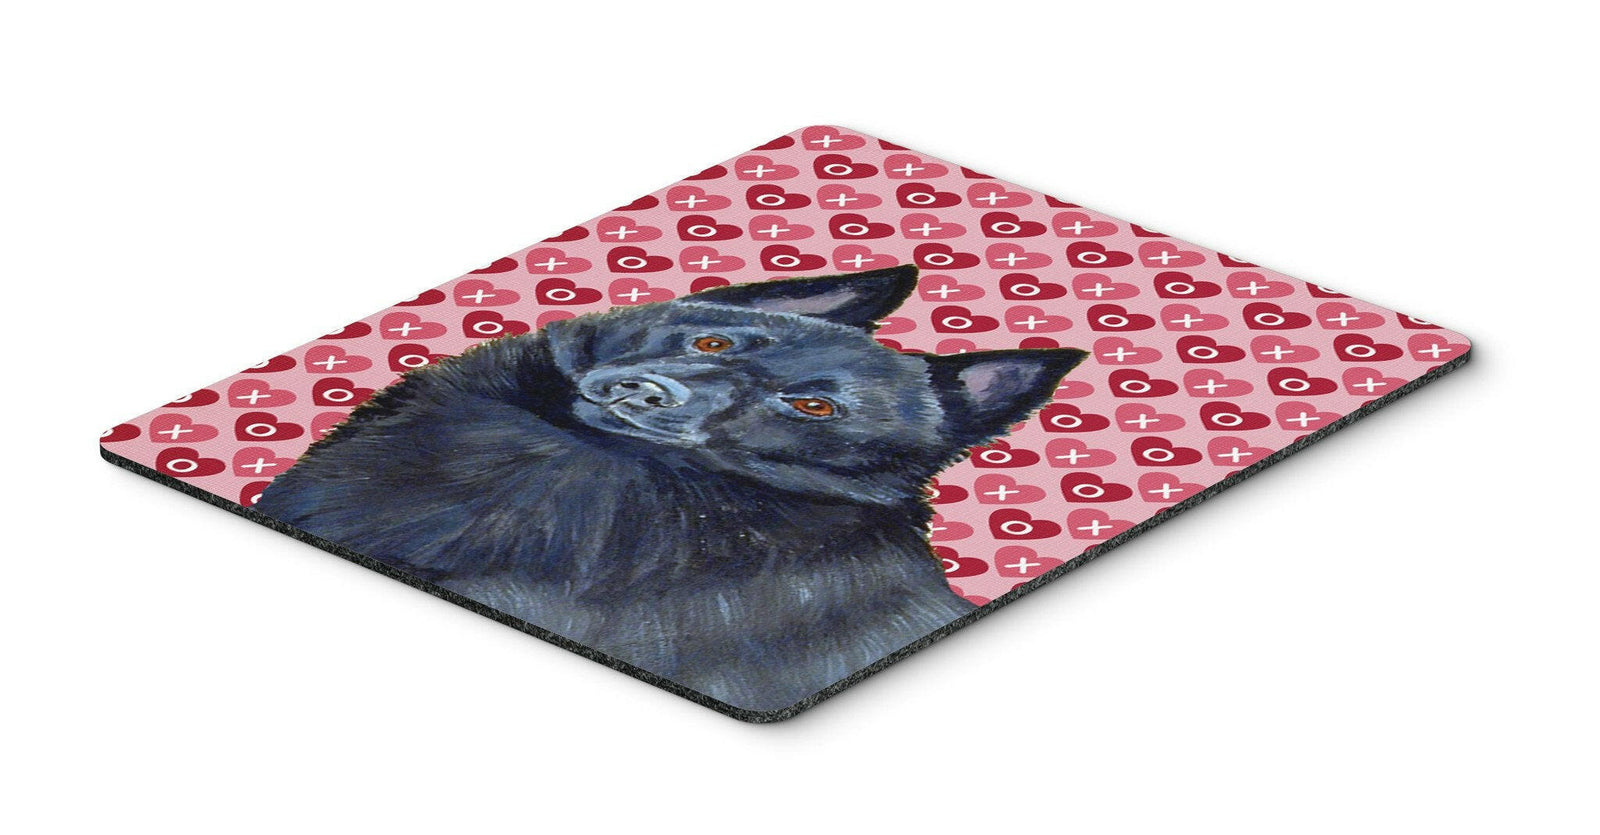 Schipperke Hearts Love and Valentine's Day Mouse Pad, Hot Pad or Trivet by Caroline's Treasures